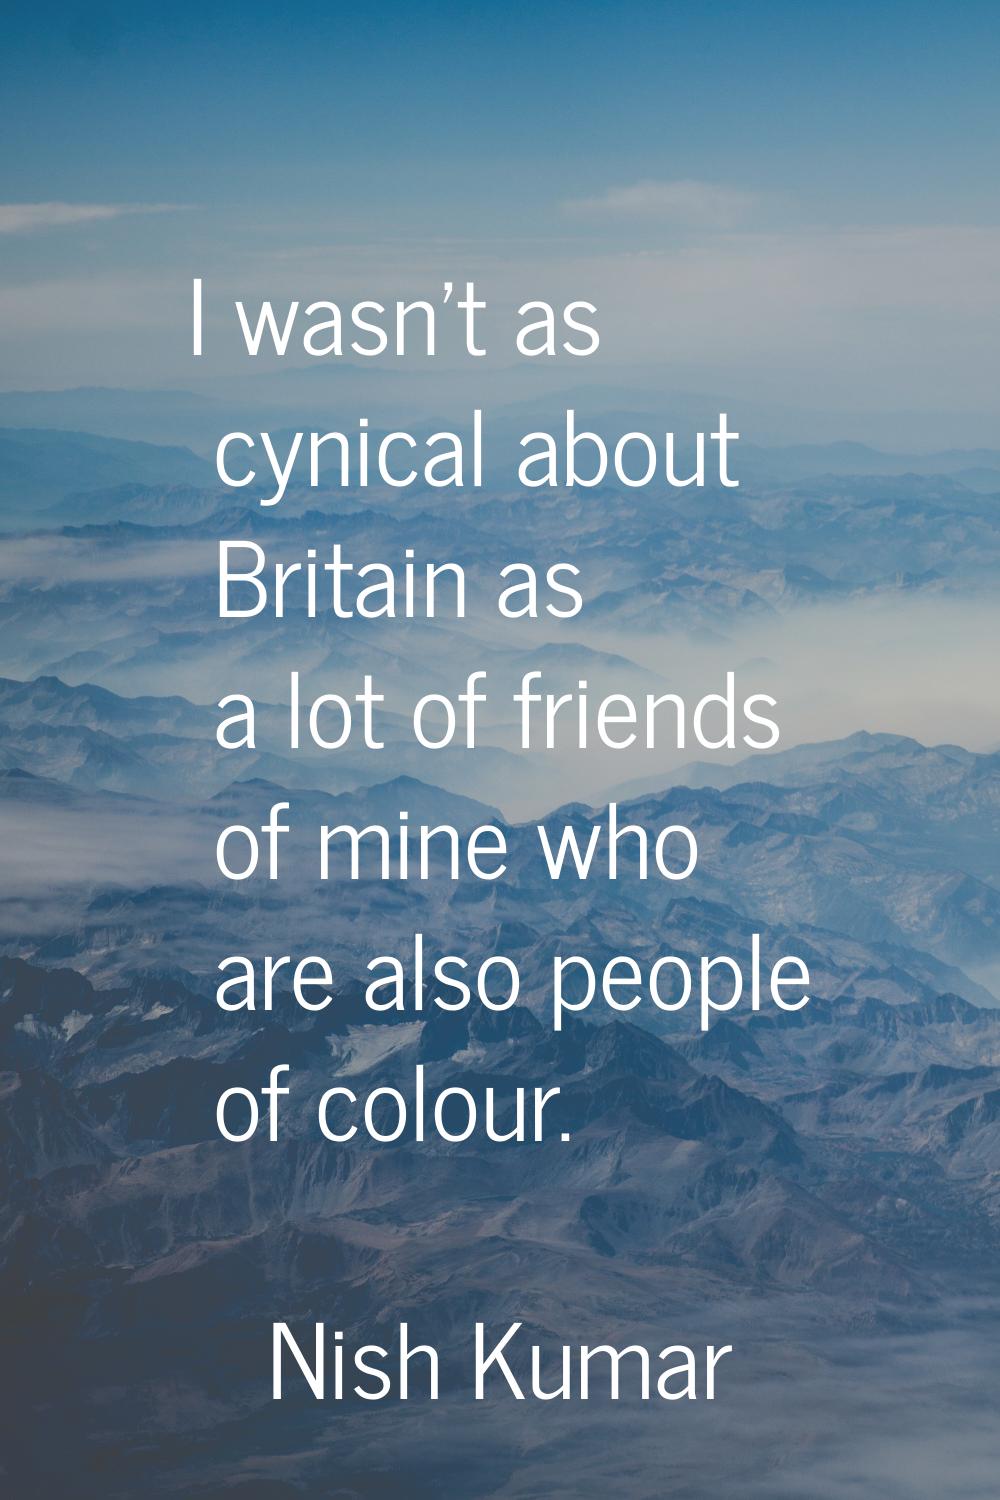 I wasn’t as cynical about Britain as a lot of friends of mine who are also people of colour.